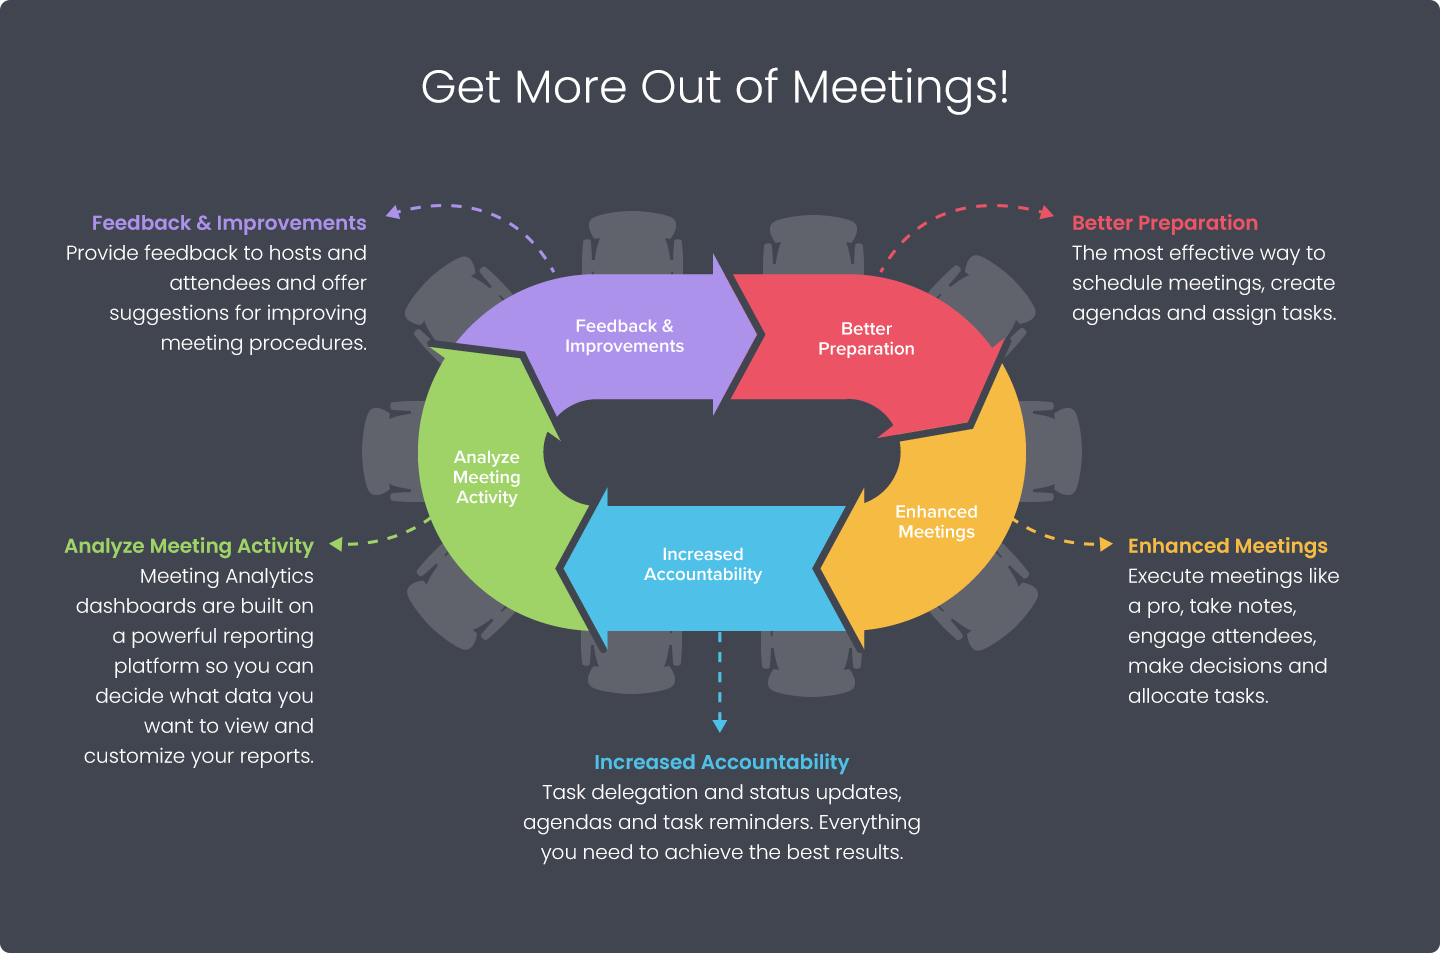 Get more out of meetings!